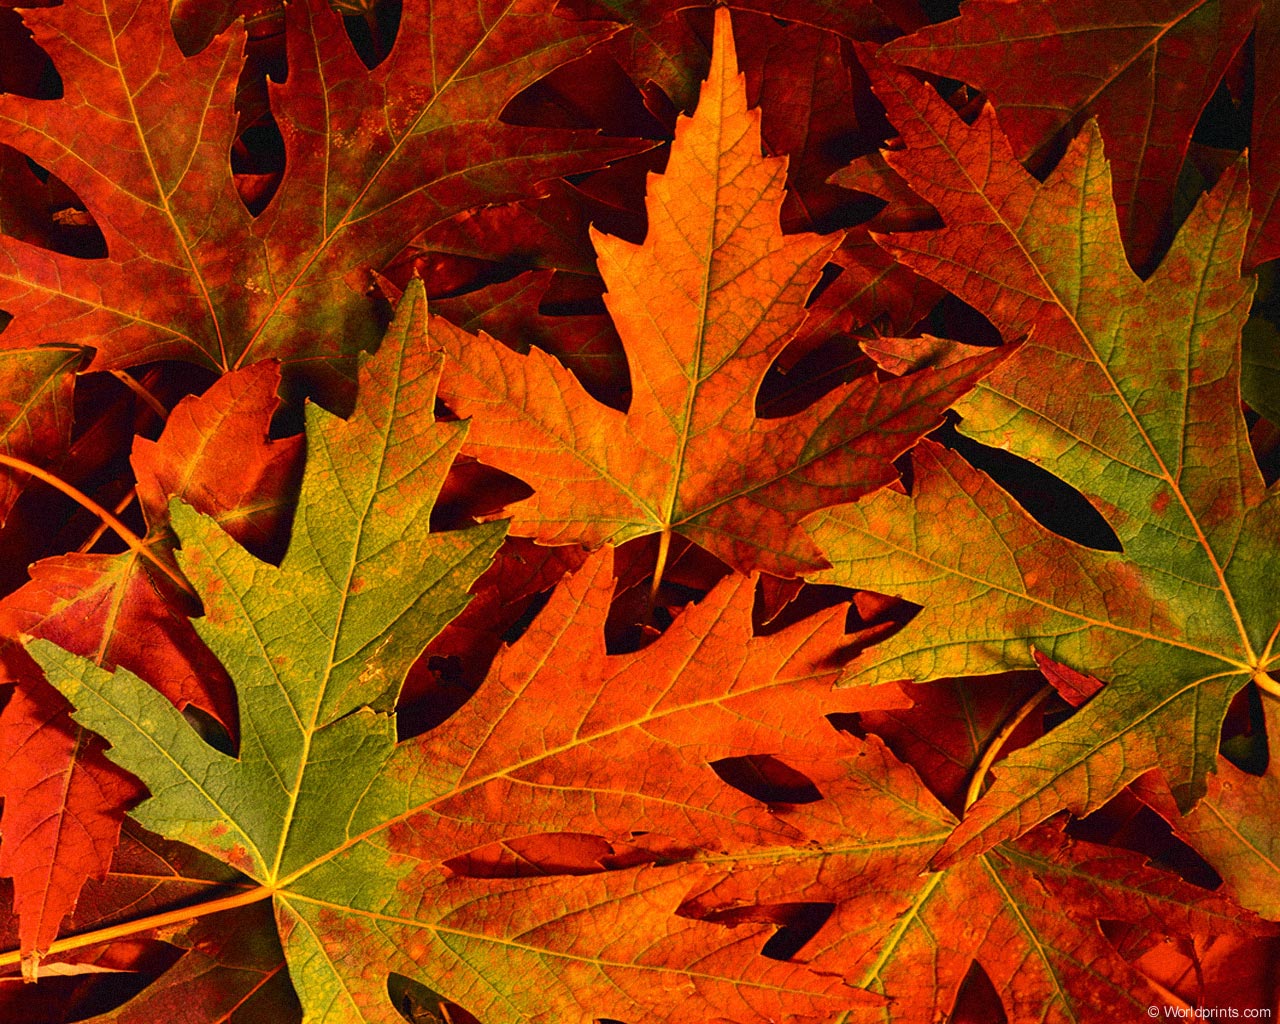 images > fall leaves > 3, FALL LEAVES BACKGROUNDS FALL LAVES HD ...